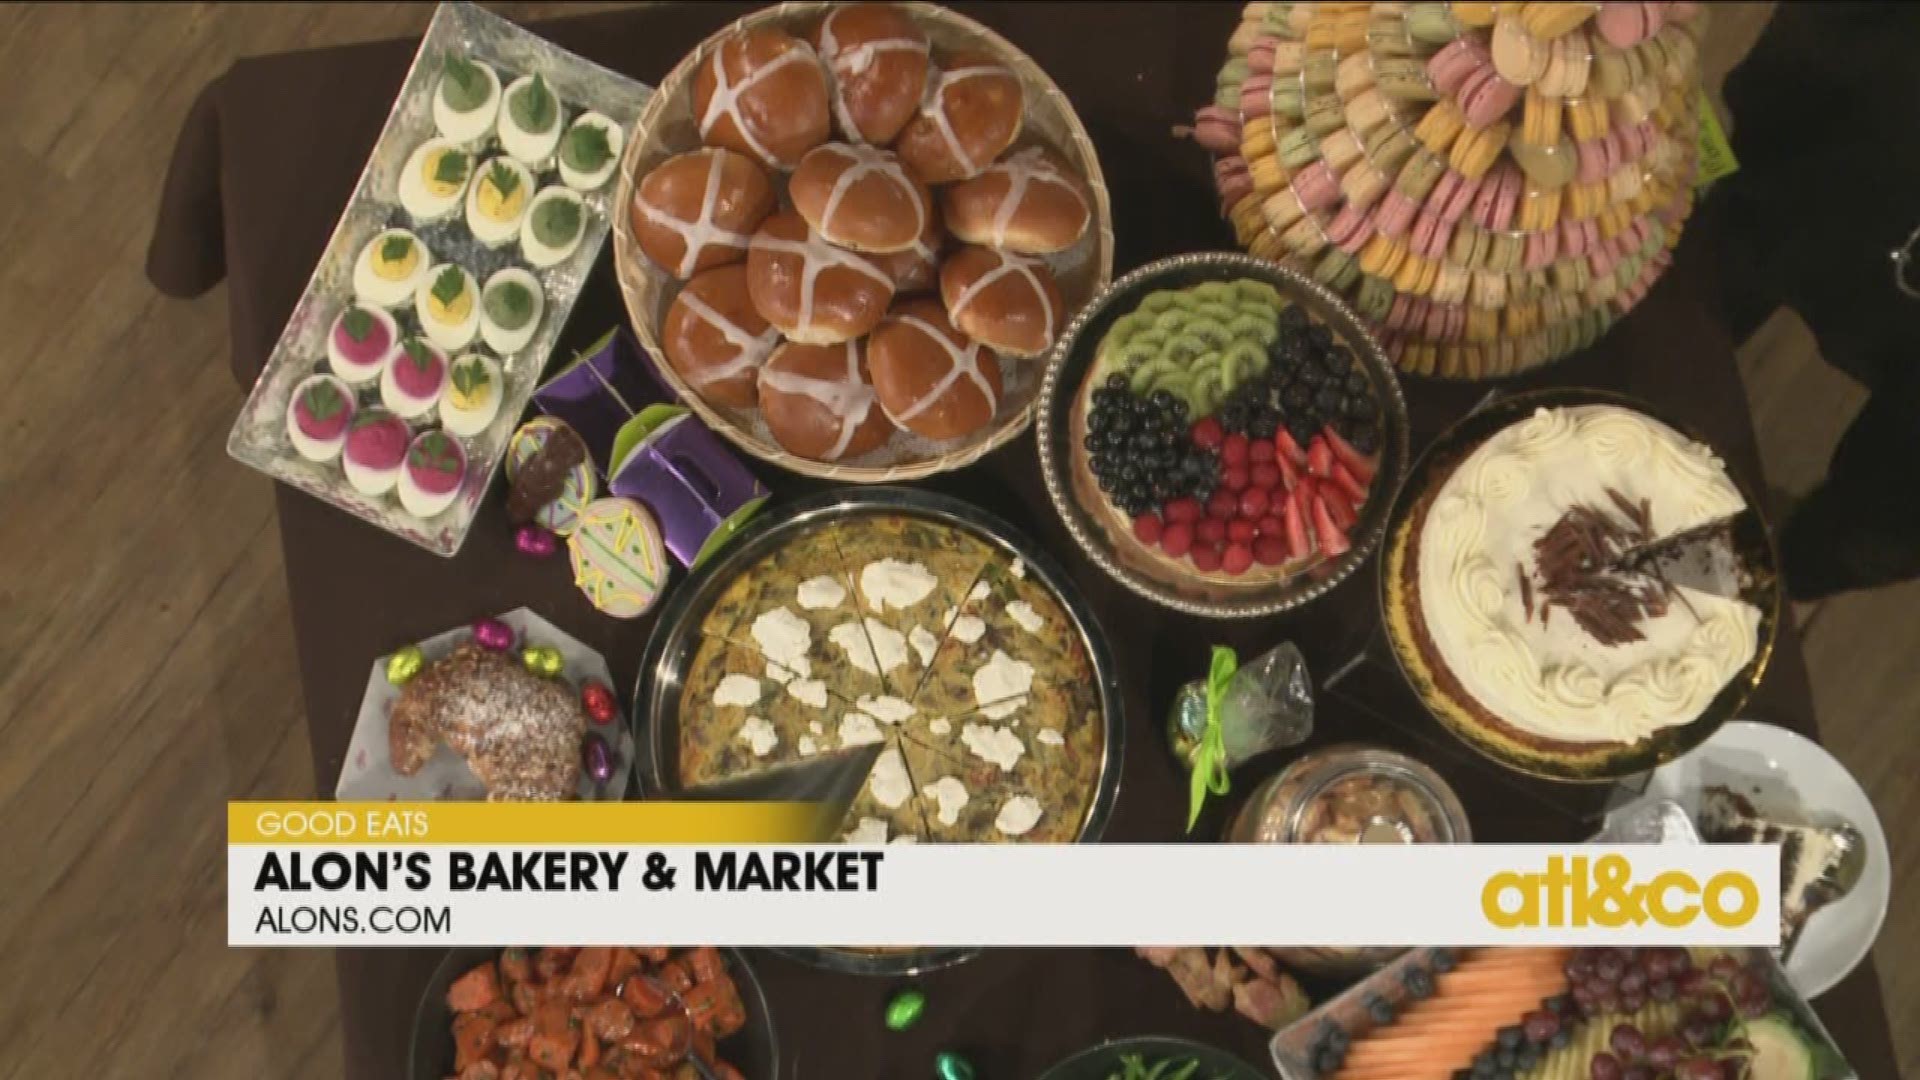 Get the most beautiful spread for your next holiday/event from Alon's Bakery & Market! Robyn Spizman shared their decadent eats perfect for Passover, Easter, Mother’s Day... you name it!